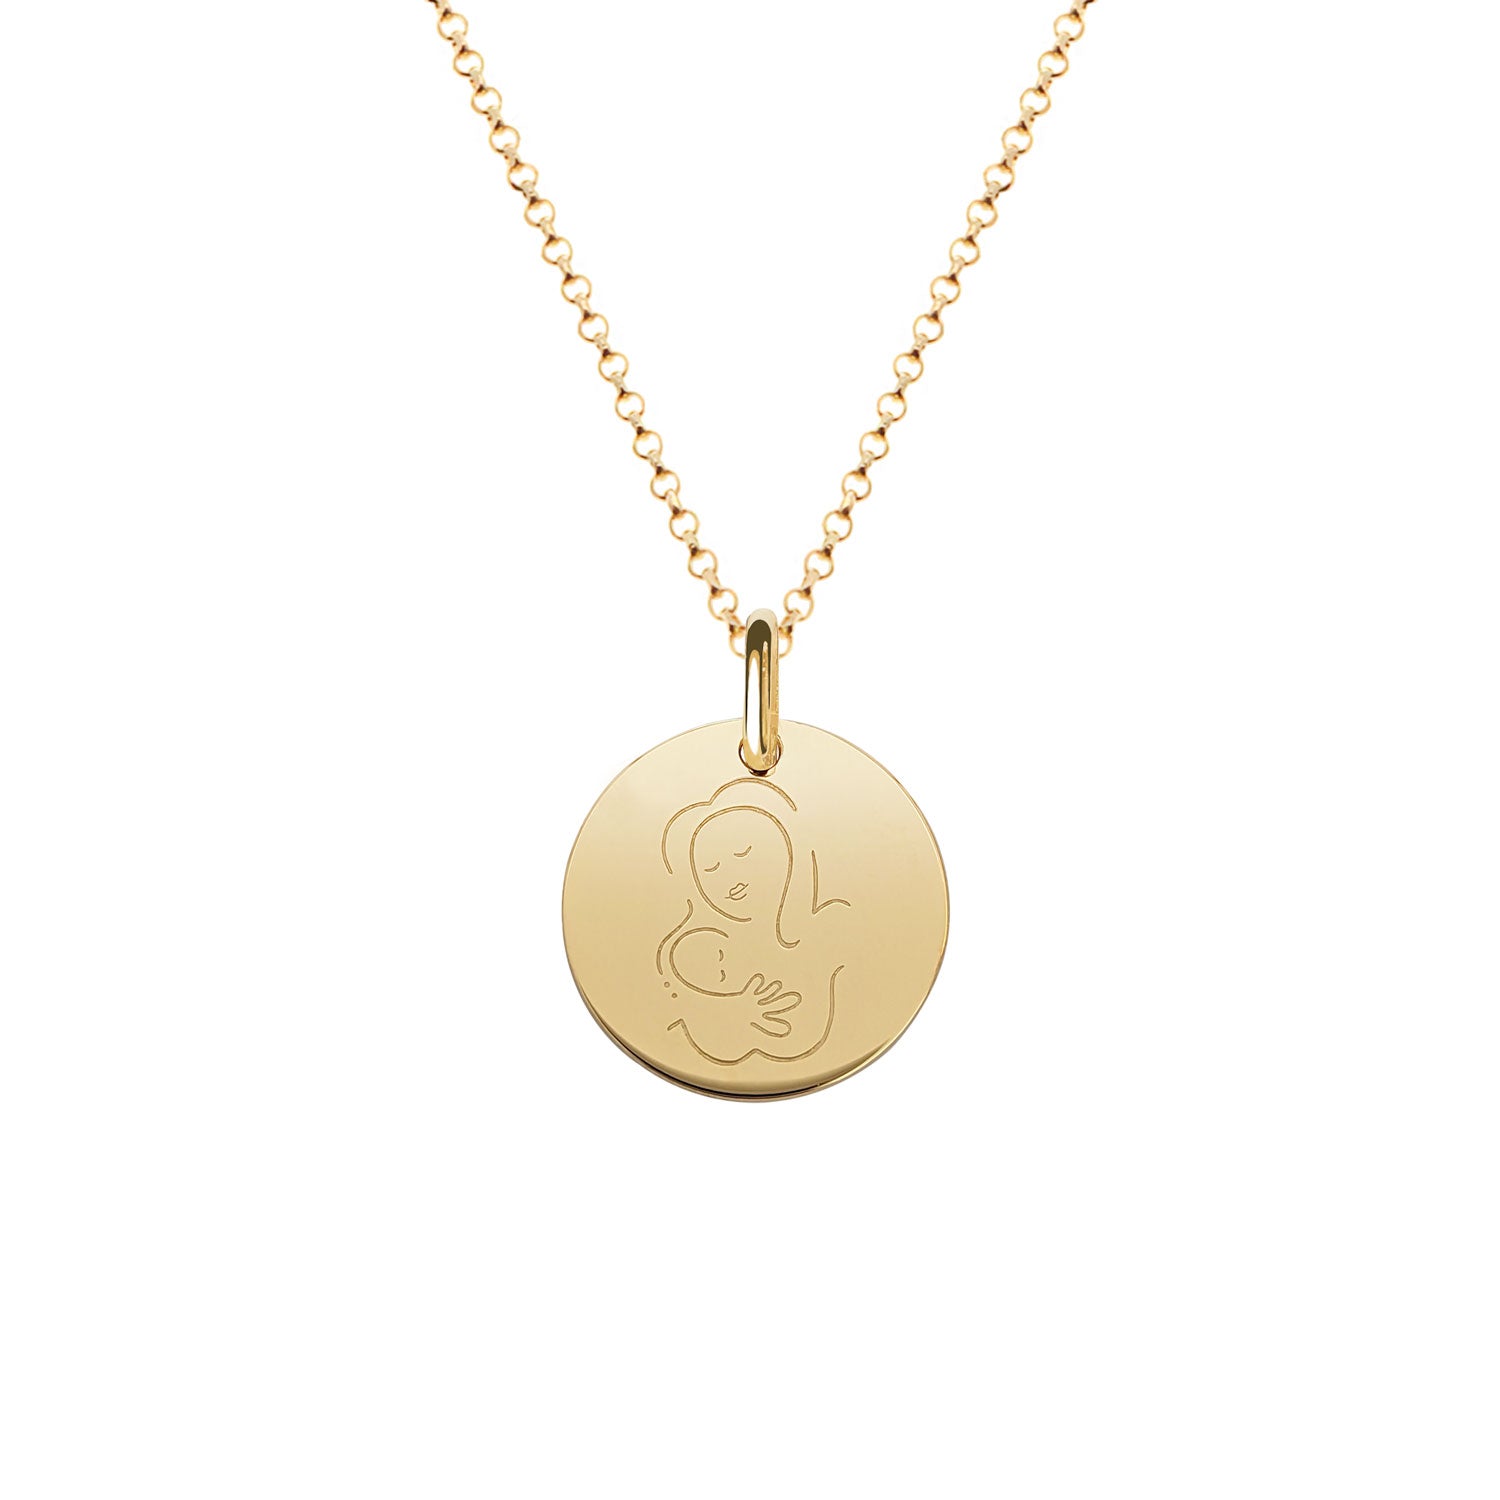 Muze 18k gold Vermeil Medal child necklace, art inspired jewelry symbol of love, protection, tenderness and motherhood. A meaningful and sentimental gift perfect for mother, newly born or godchild